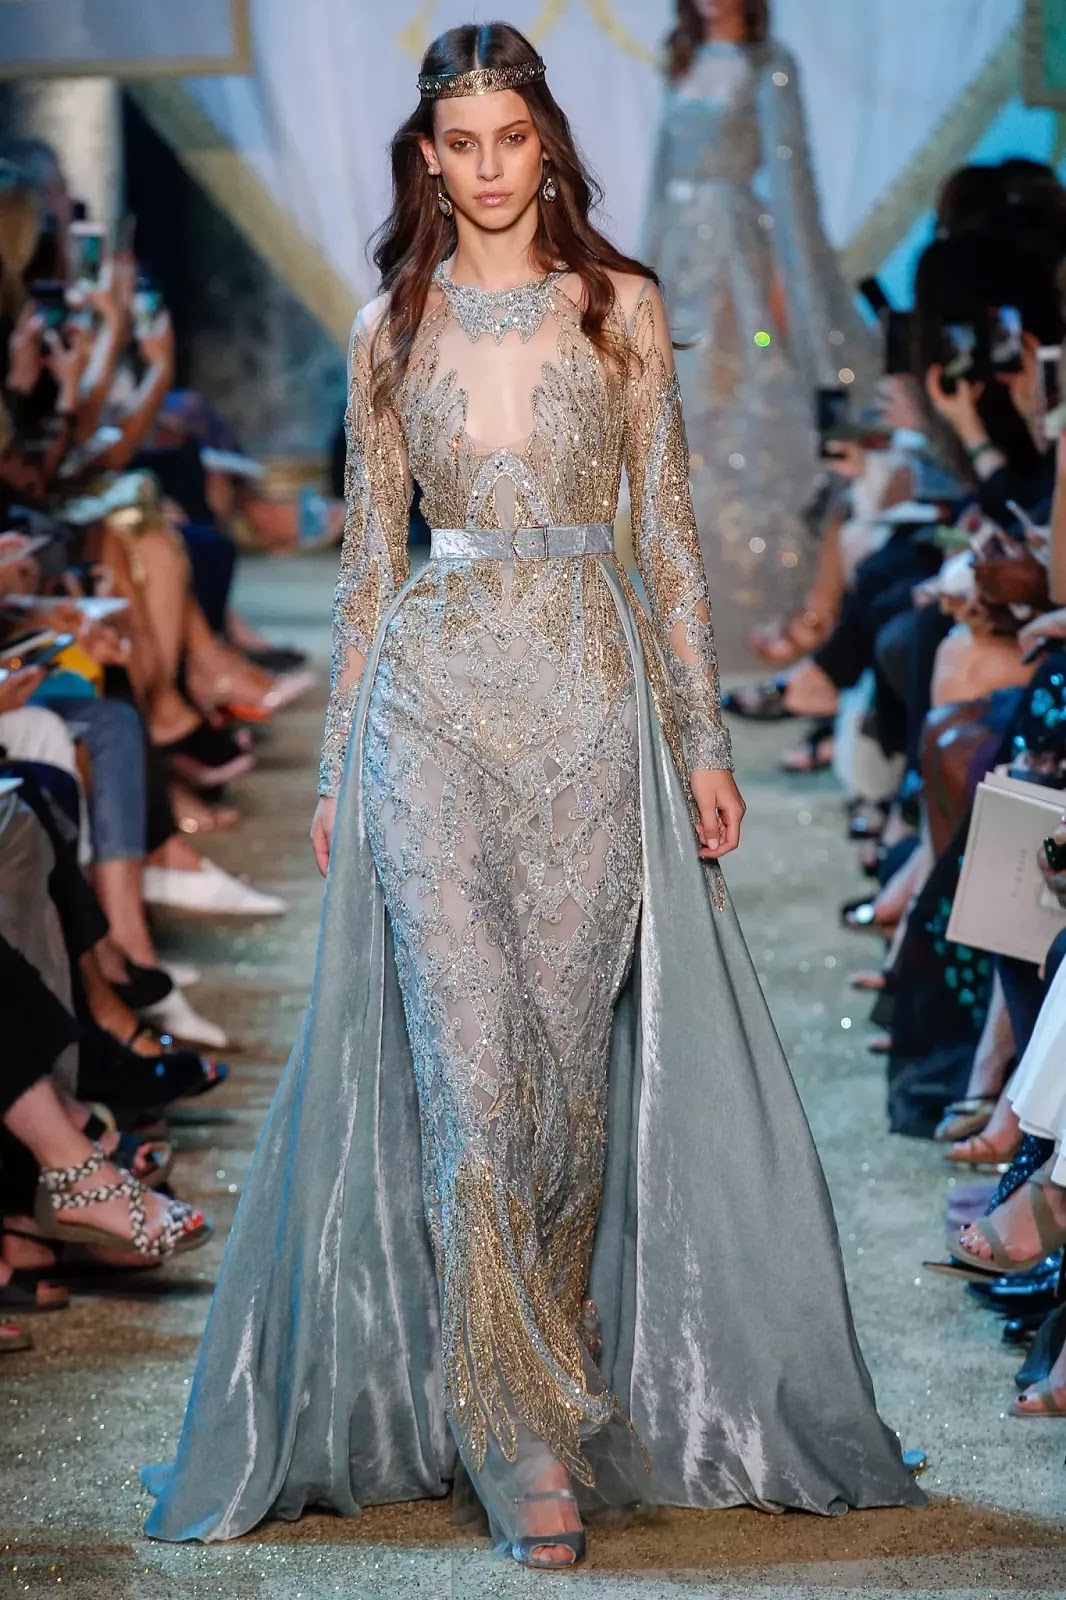 Mom's Turf: Elie Saab Fall 2017 Couture Collection